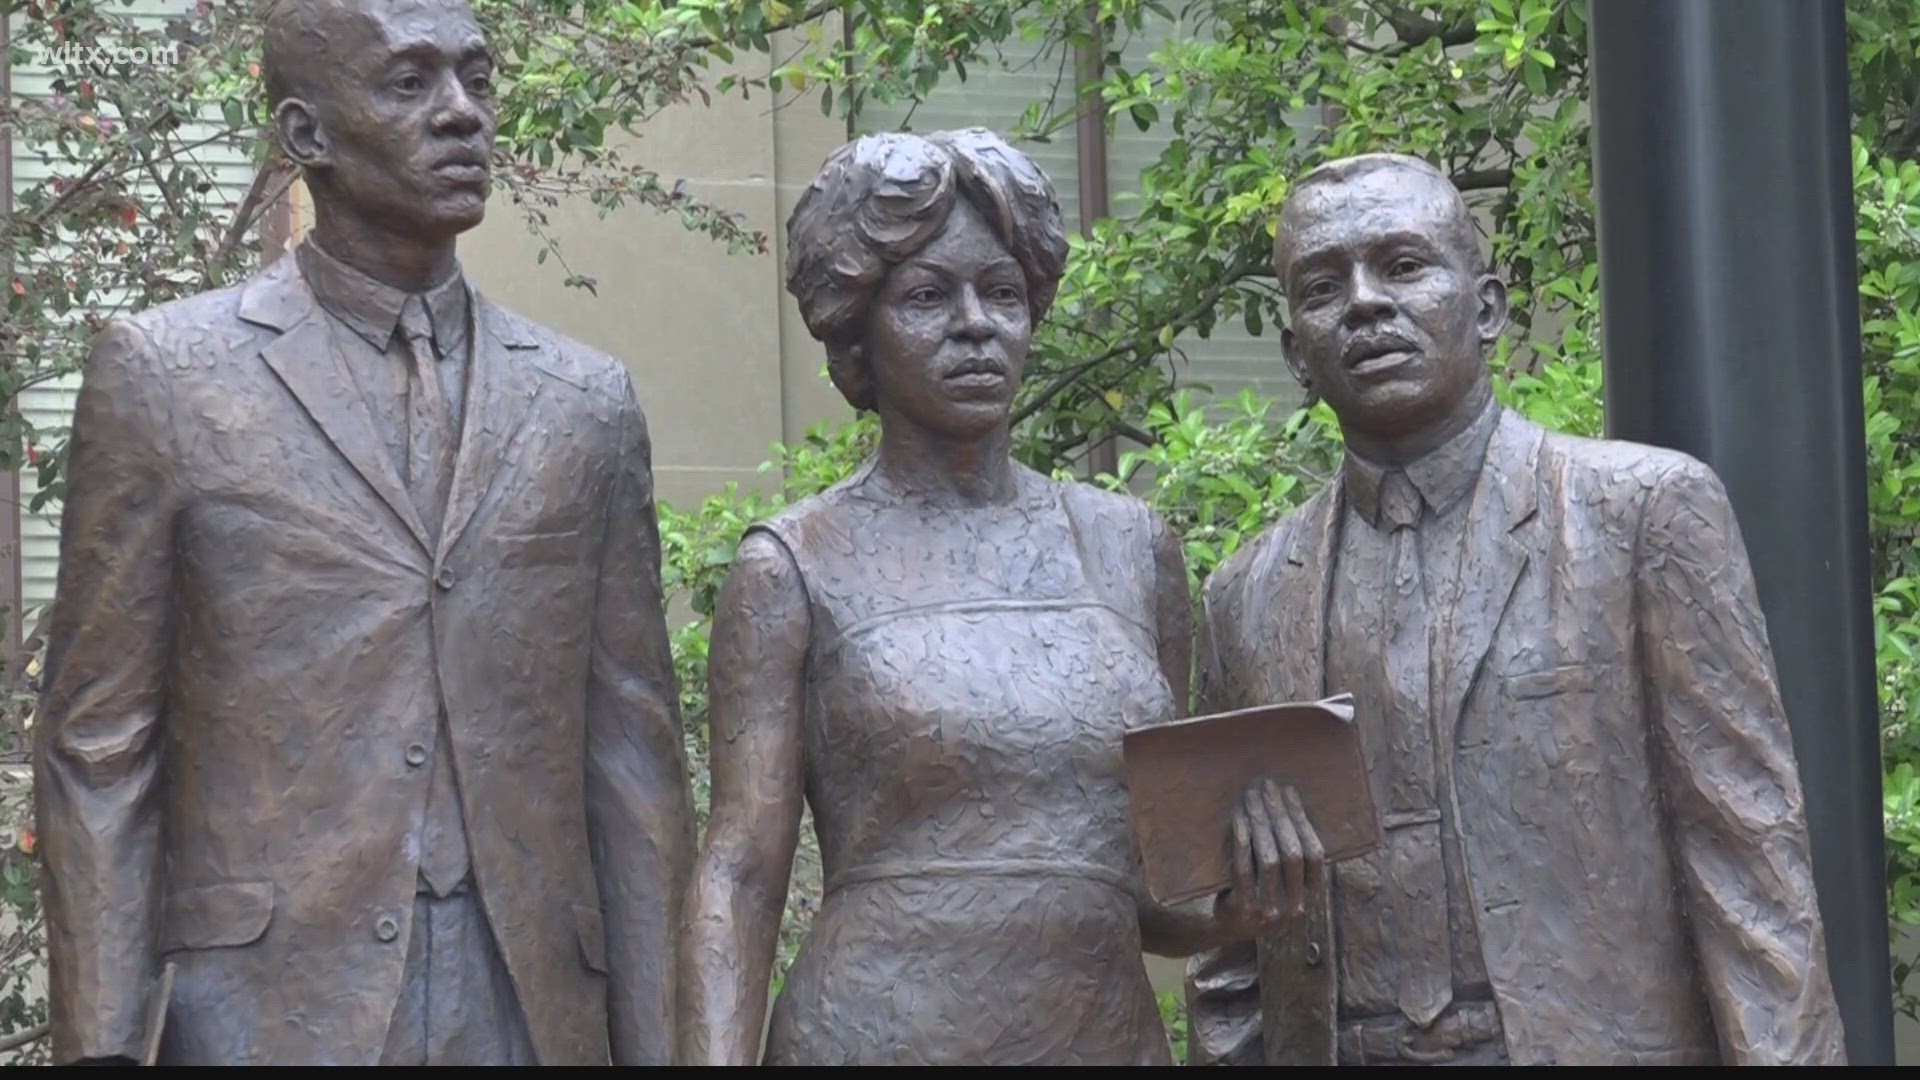 The new 12-foot bronze monument depicts the moment when three Black students desegregated the school in the 1960s.